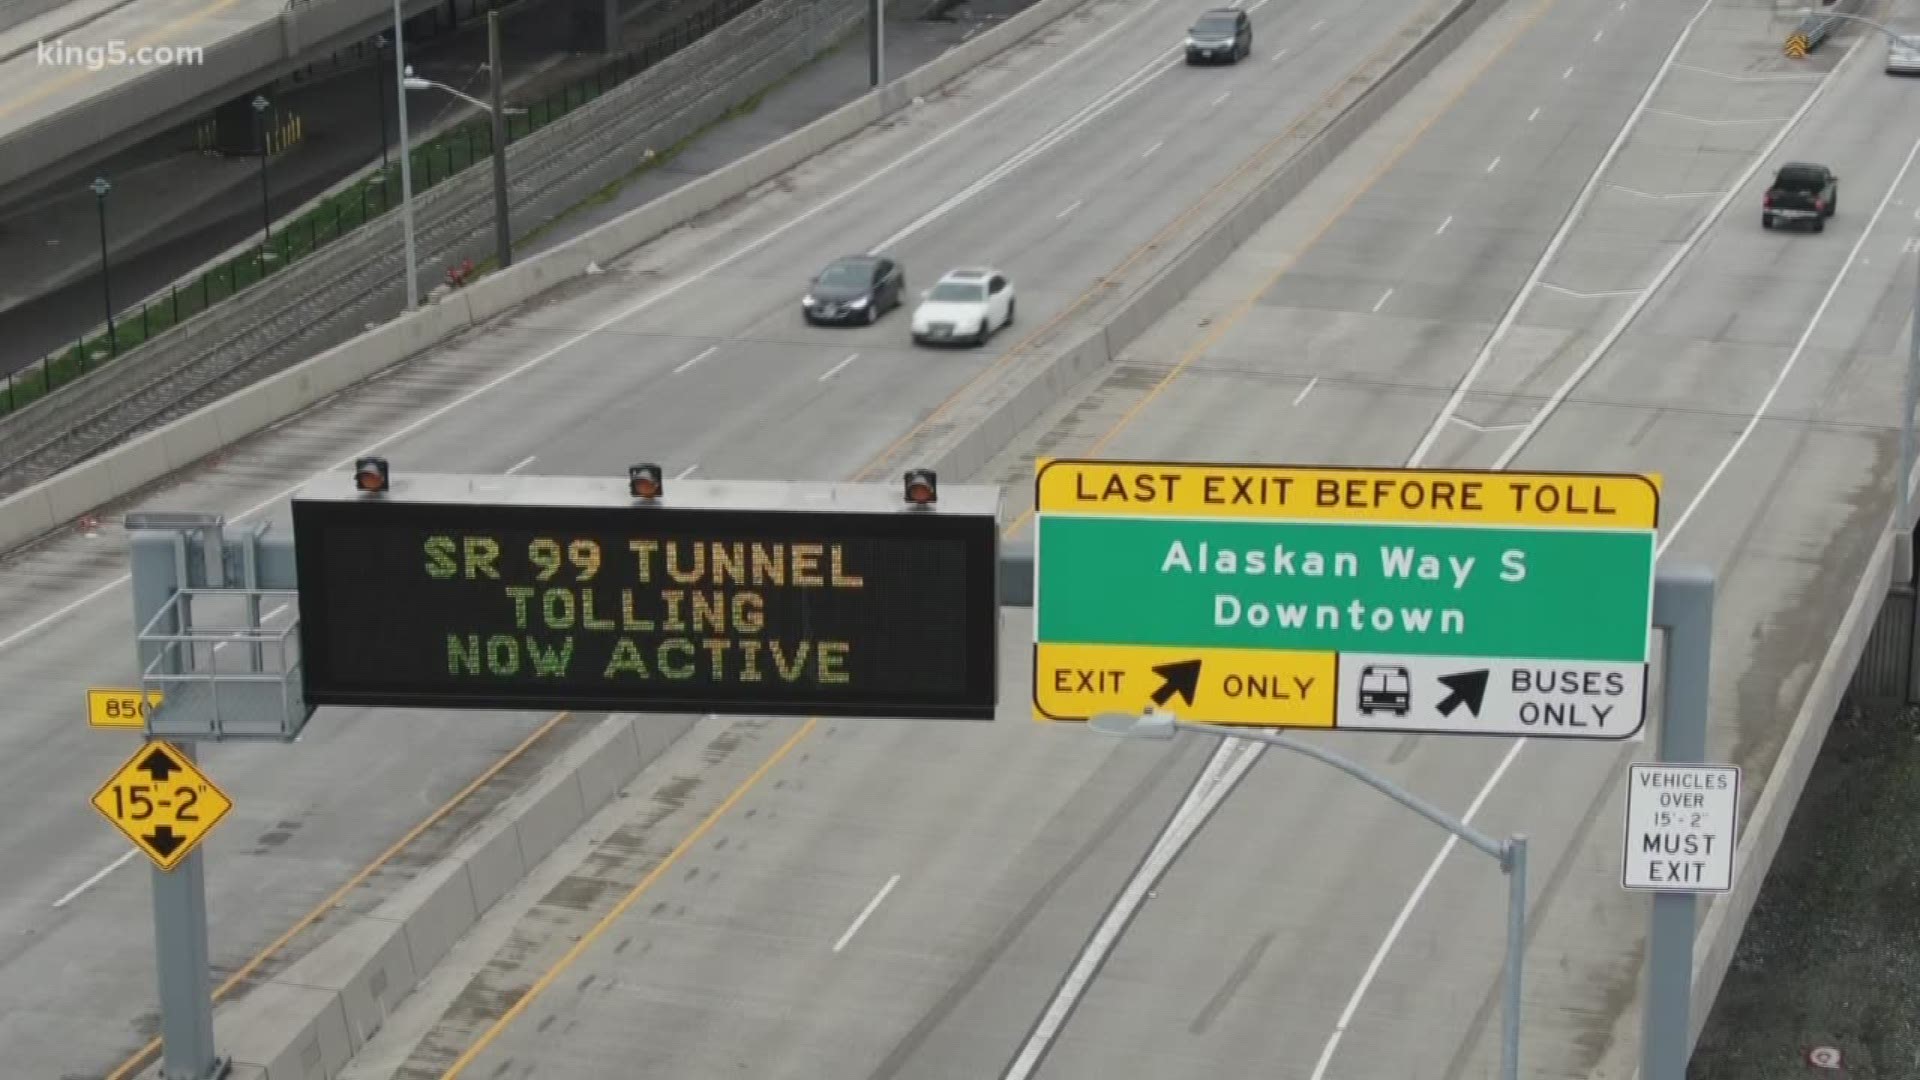 Officials warned as many as a half of drivers might try to avoid the toll in the 99 tunnel, clogging up traffic in other places.